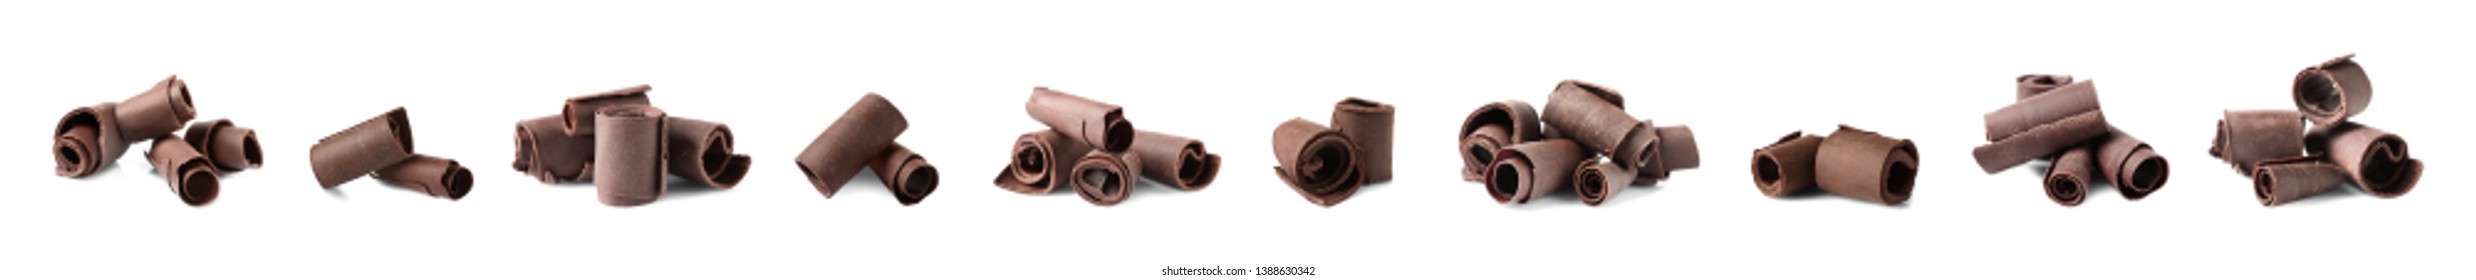 Set of delicious chocolate curls on white background